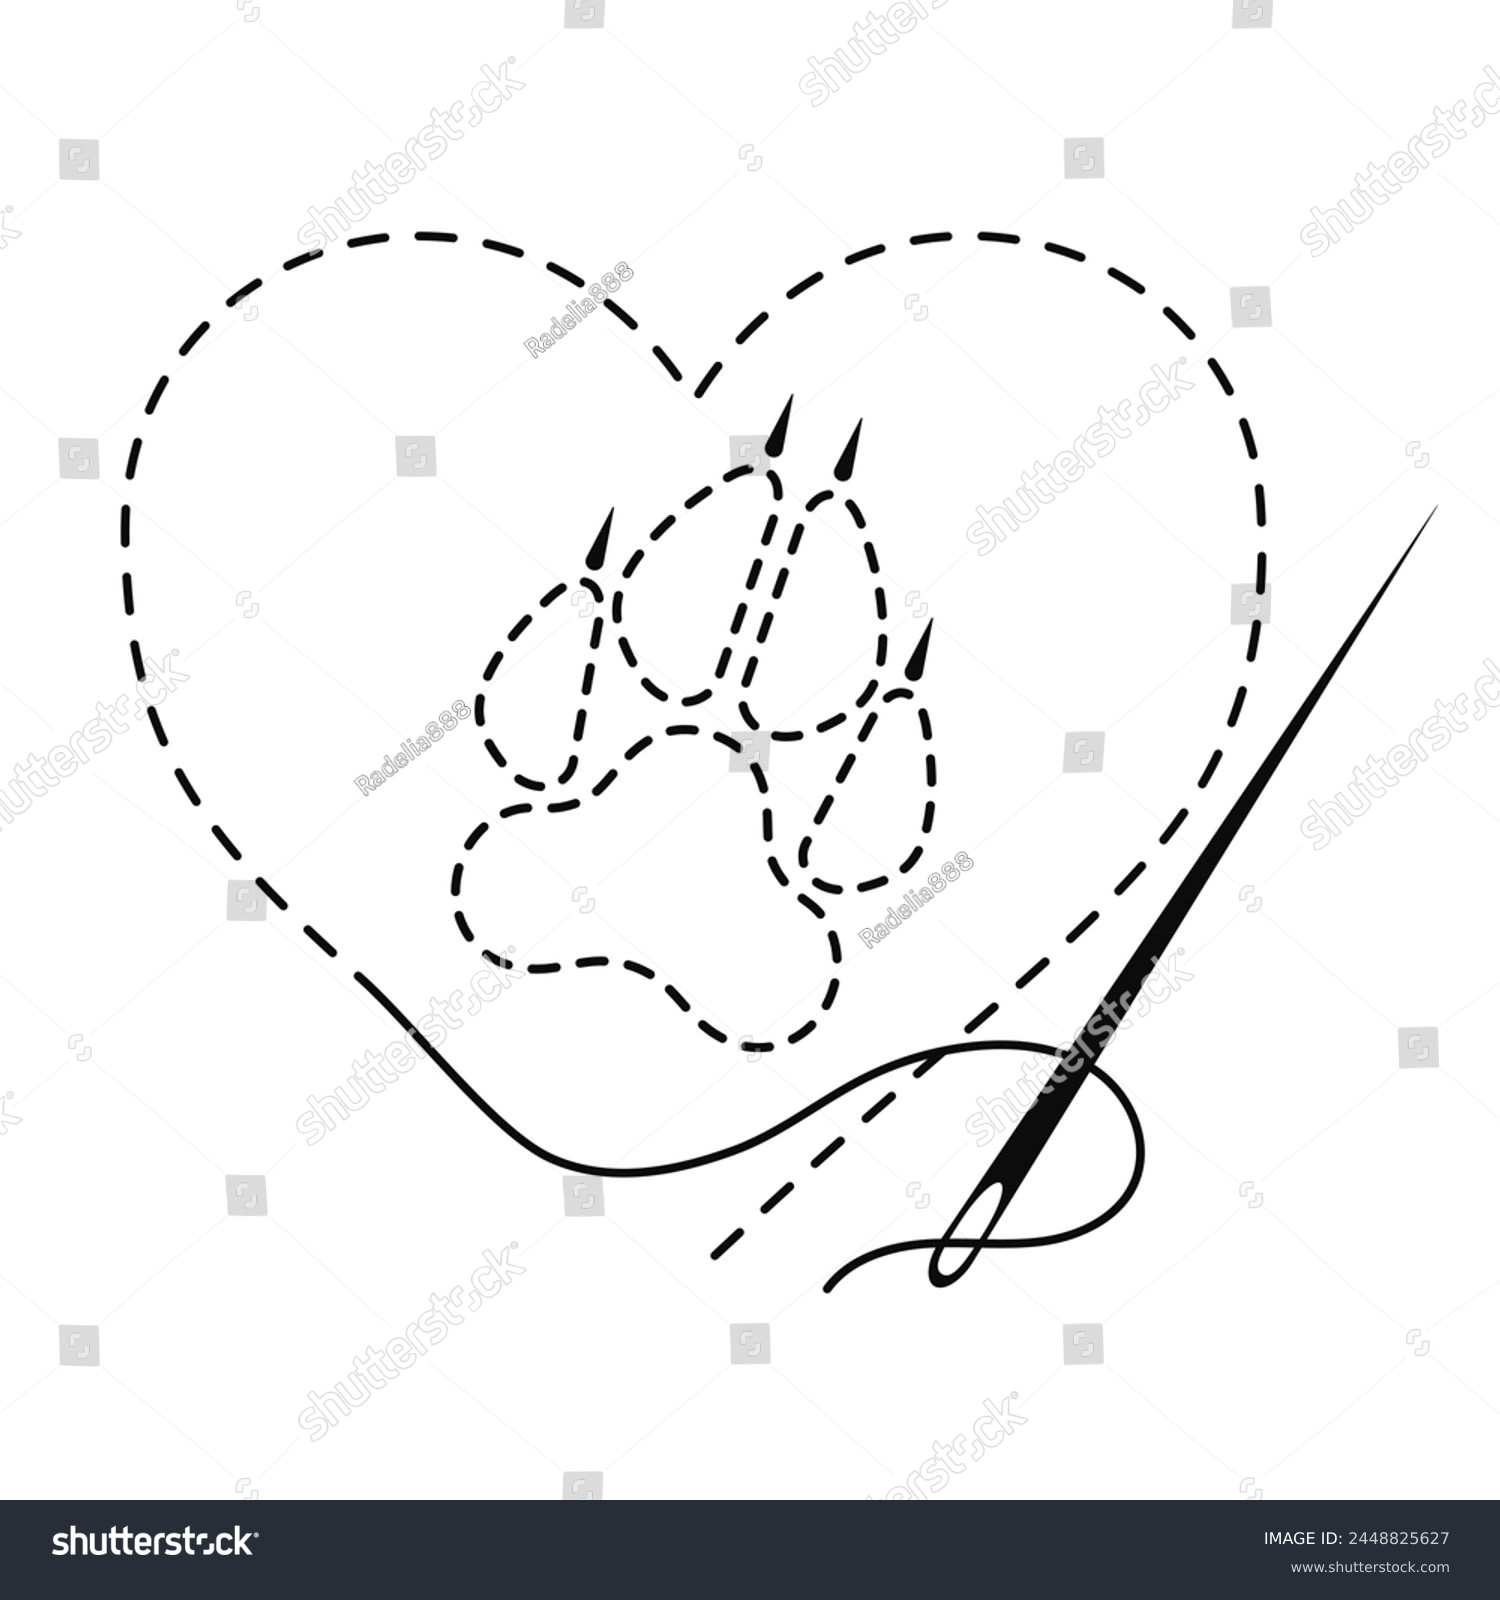 SVG of Silhouette of wolf paw and heart with interrupted contour. Vector illustration of handmade work with embroidery thread and sewing needle on white background.	 svg